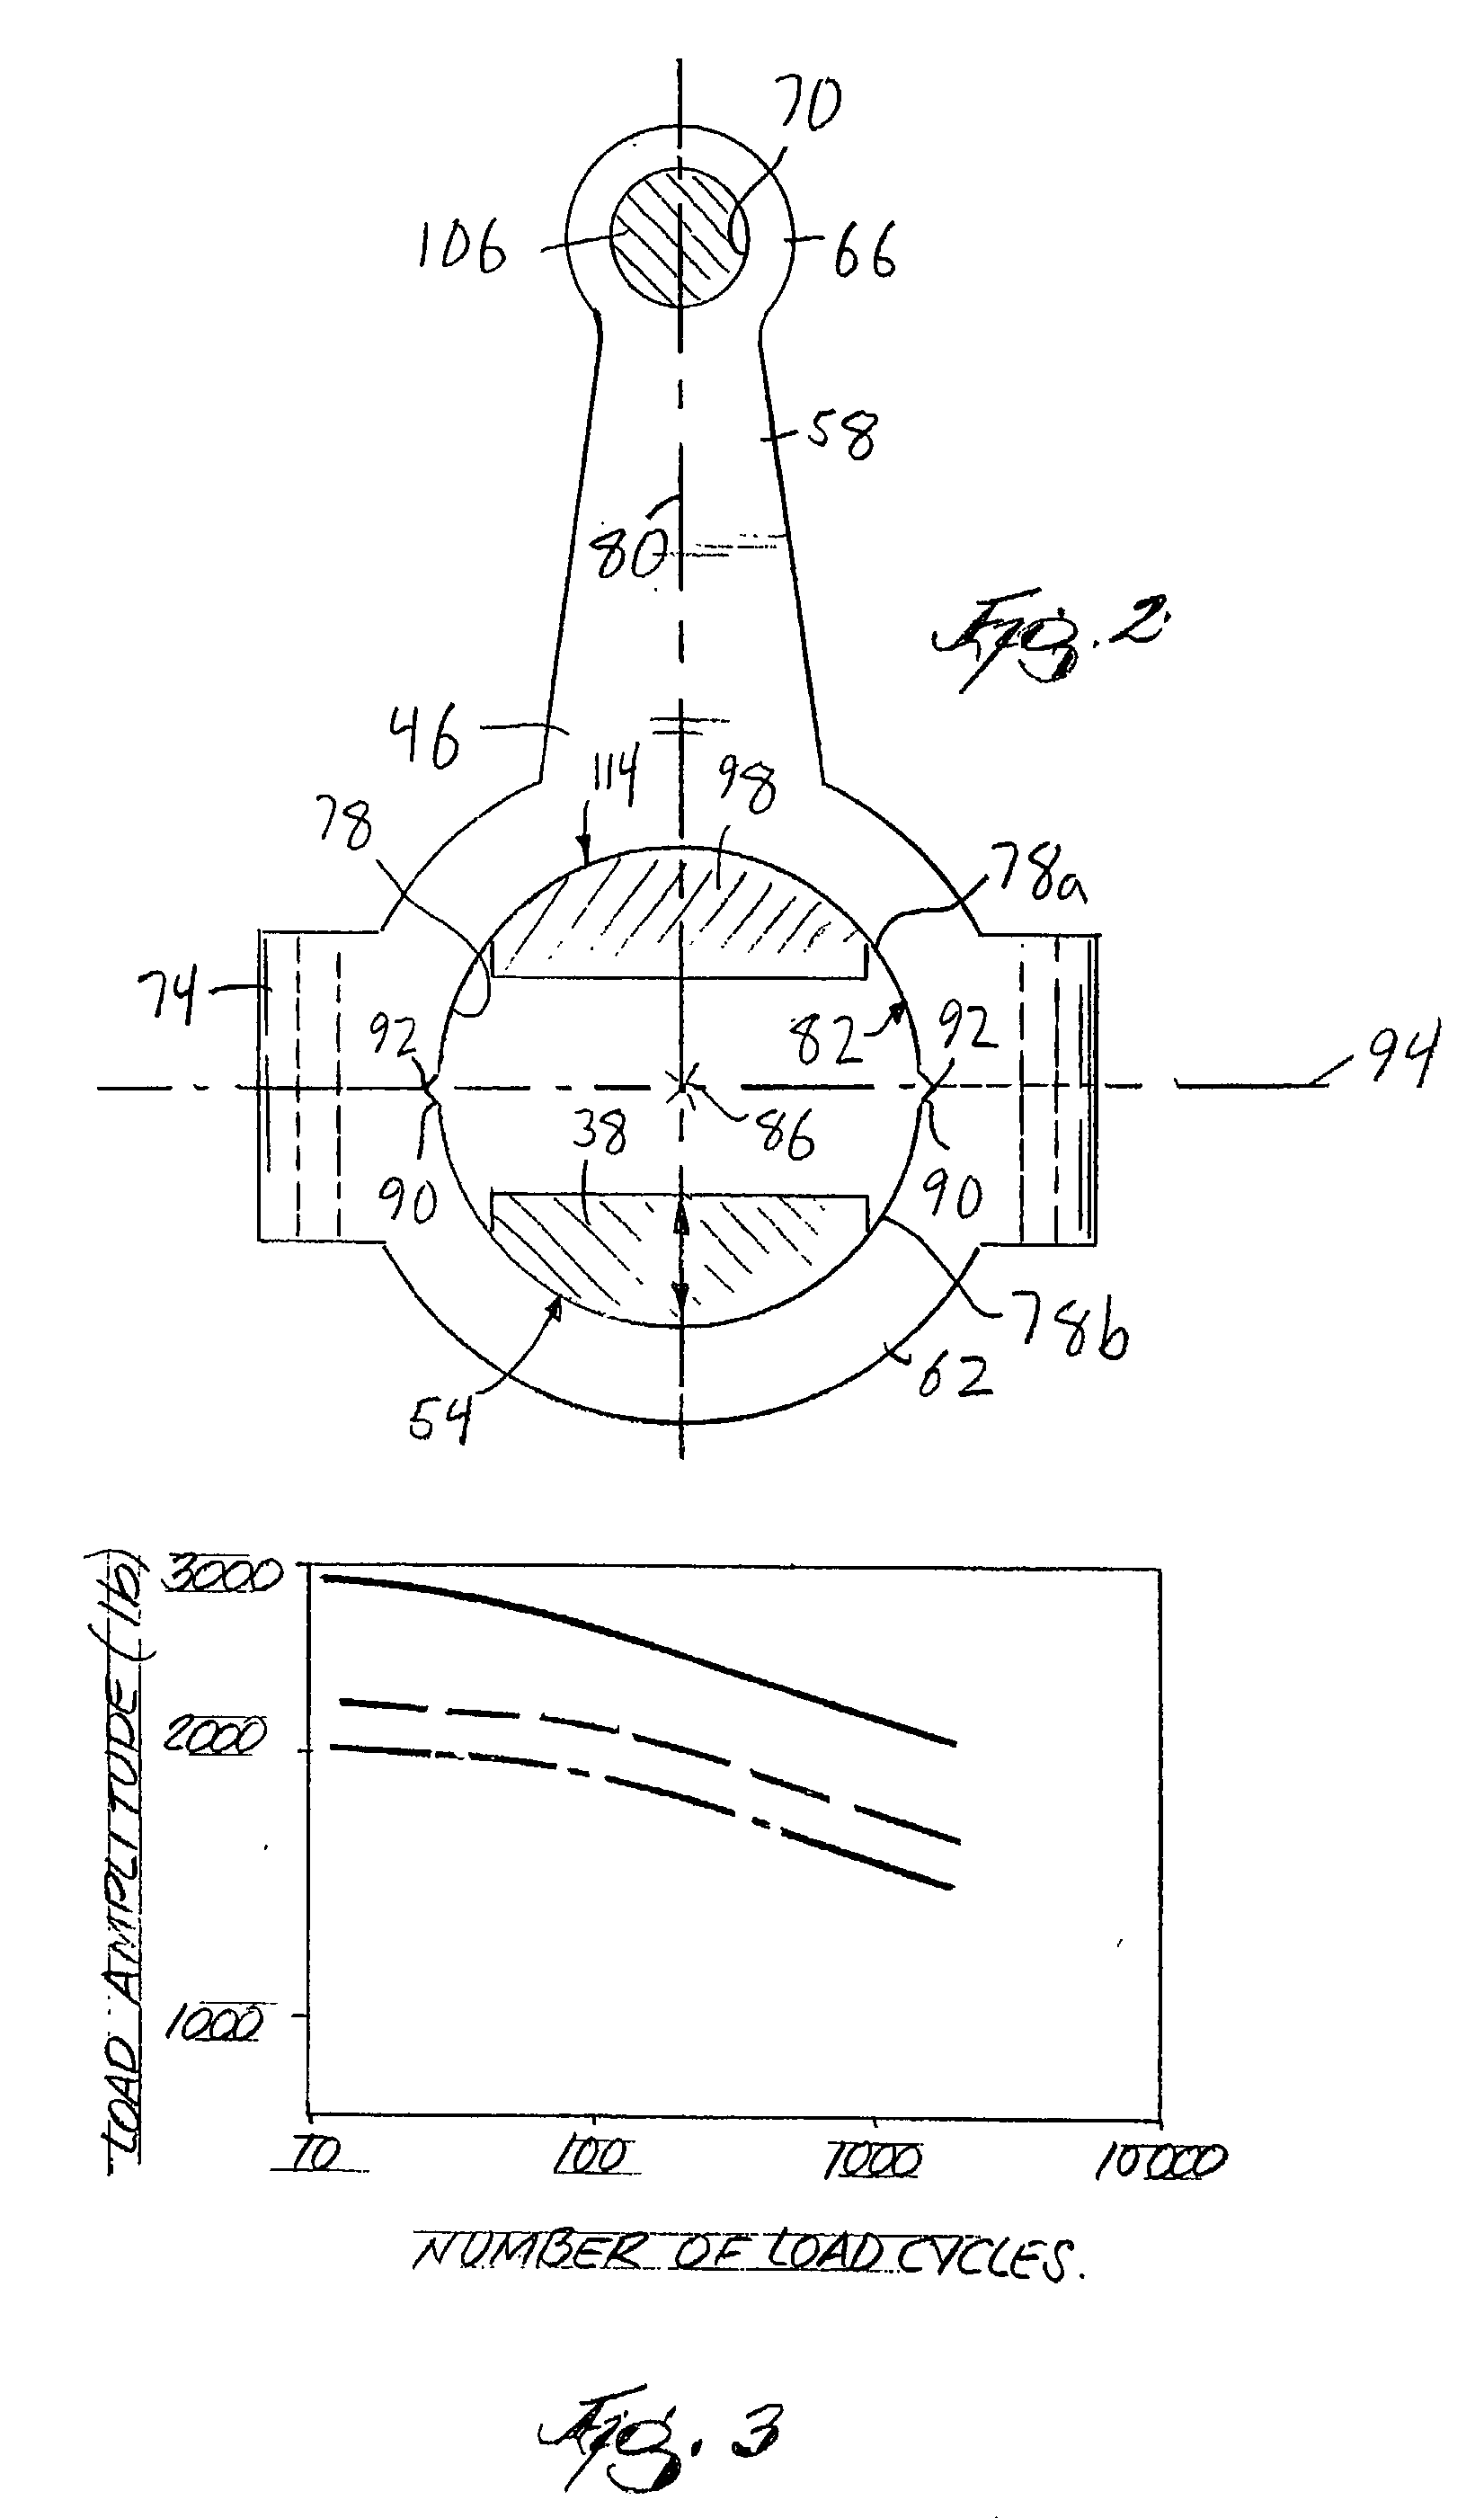 Dynamic splitting of connecting rods